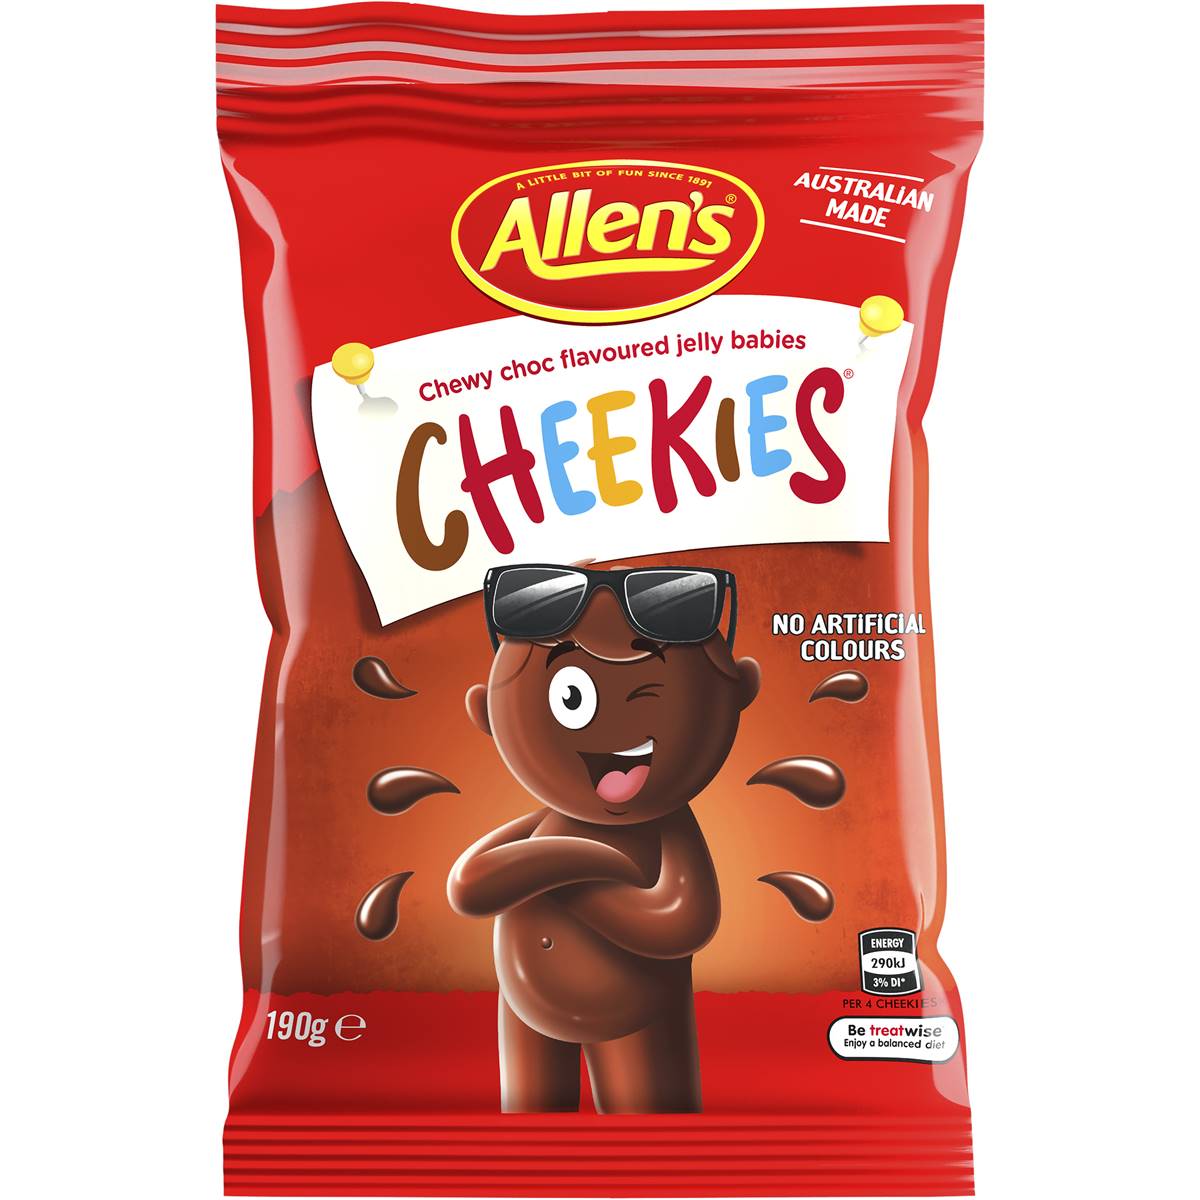 Calories in Allen's Chicos Chocolate Jelly Lollies